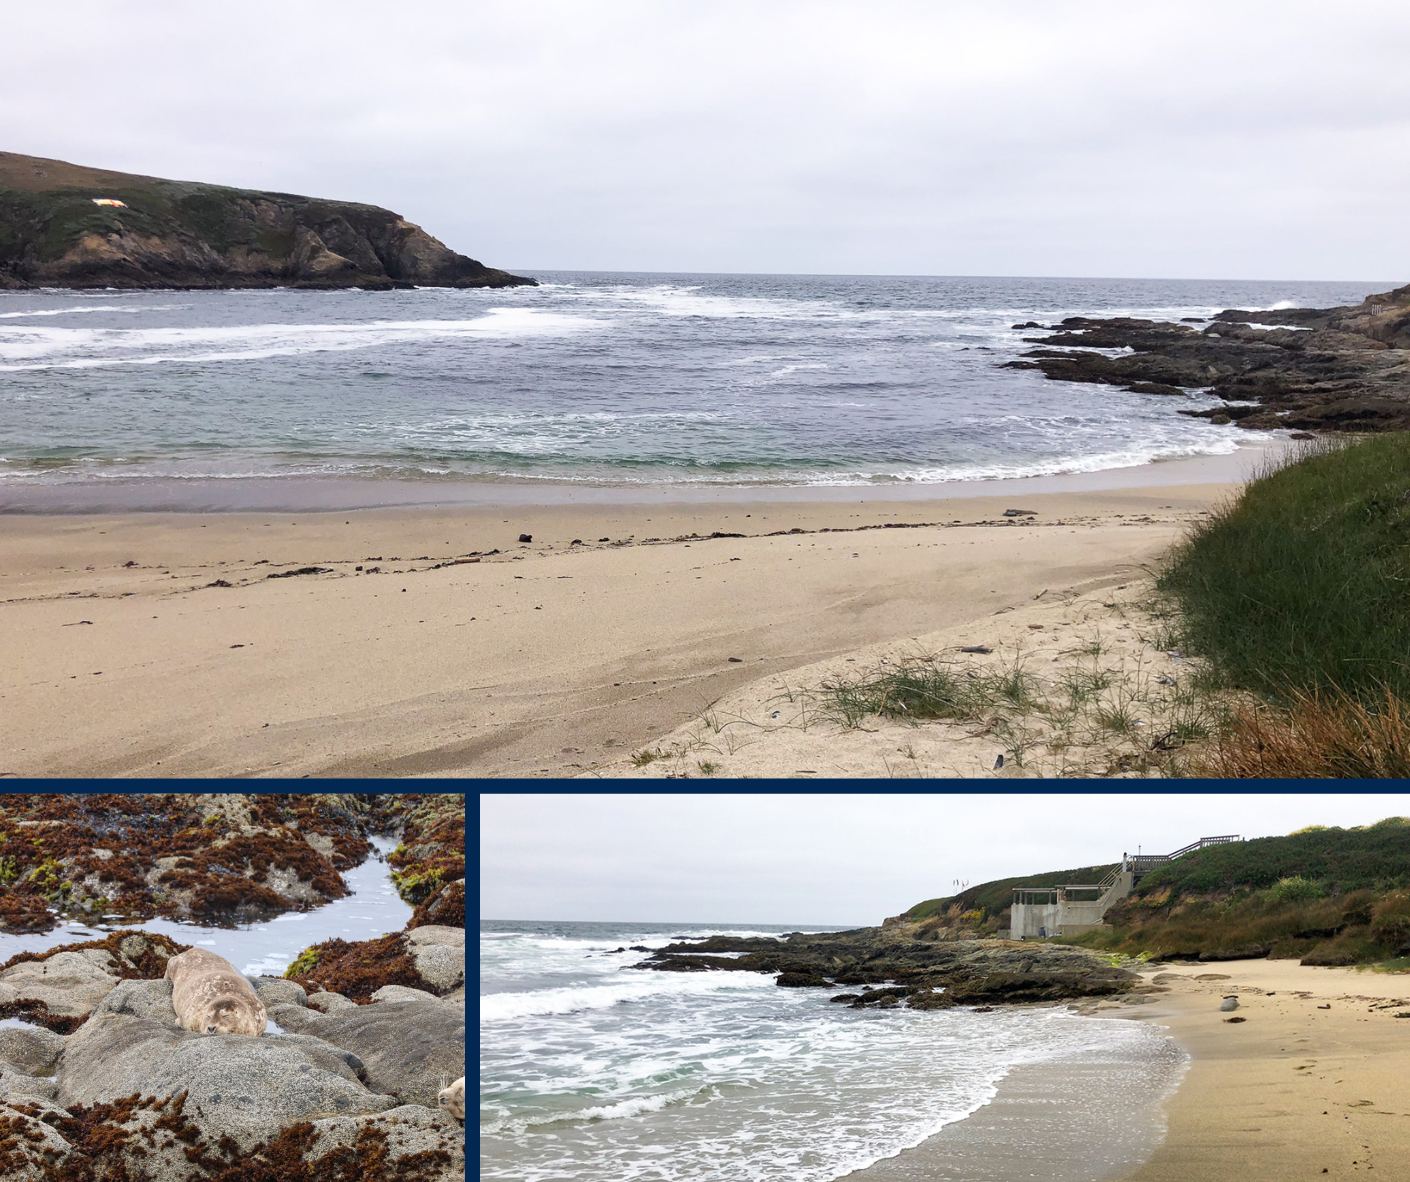 A collage showing views of Horseshoe Cove on the Bodega Marine Reserve